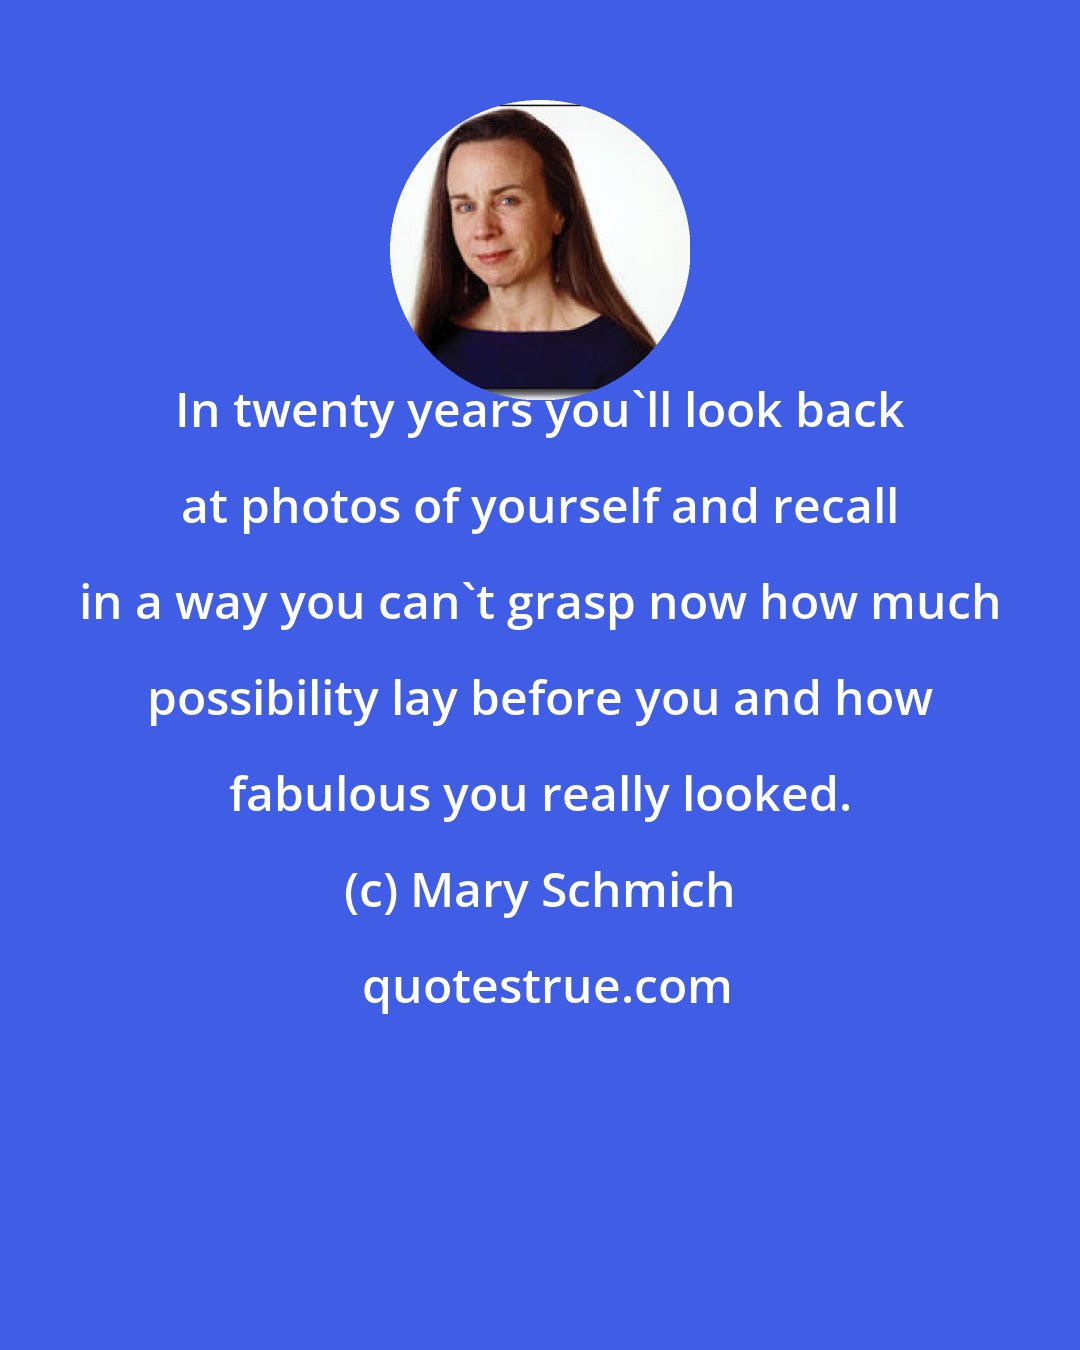 Mary Schmich: In twenty years you'll look back at photos of yourself and recall in a way you can't grasp now how much possibility lay before you and how fabulous you really looked.